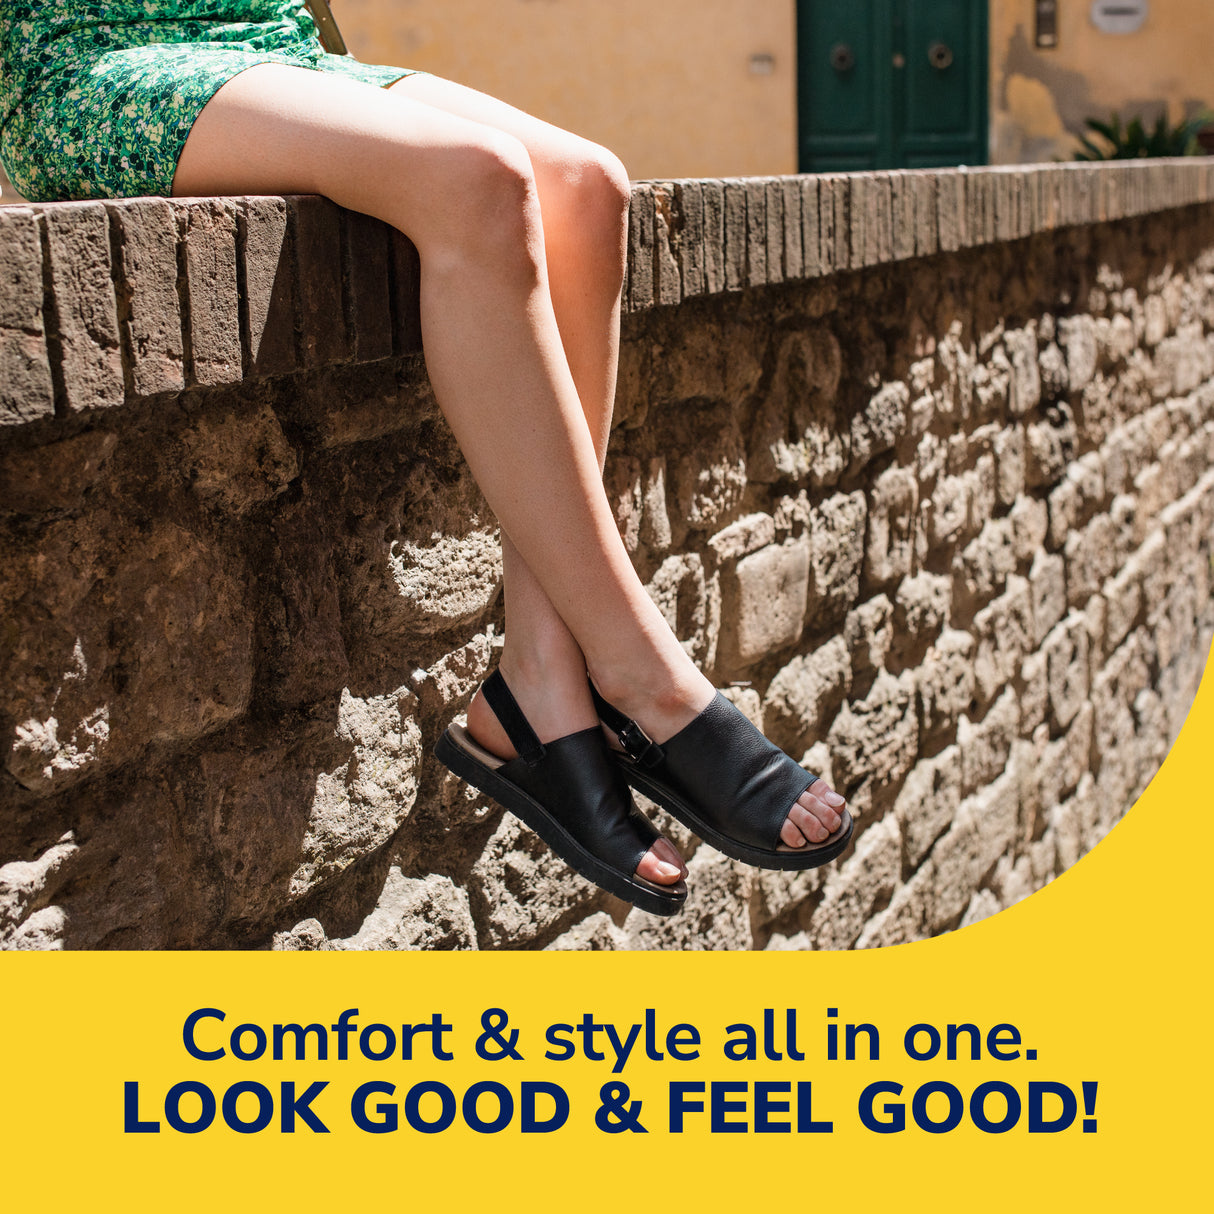 image of comfort and style all in one. look good and feel good